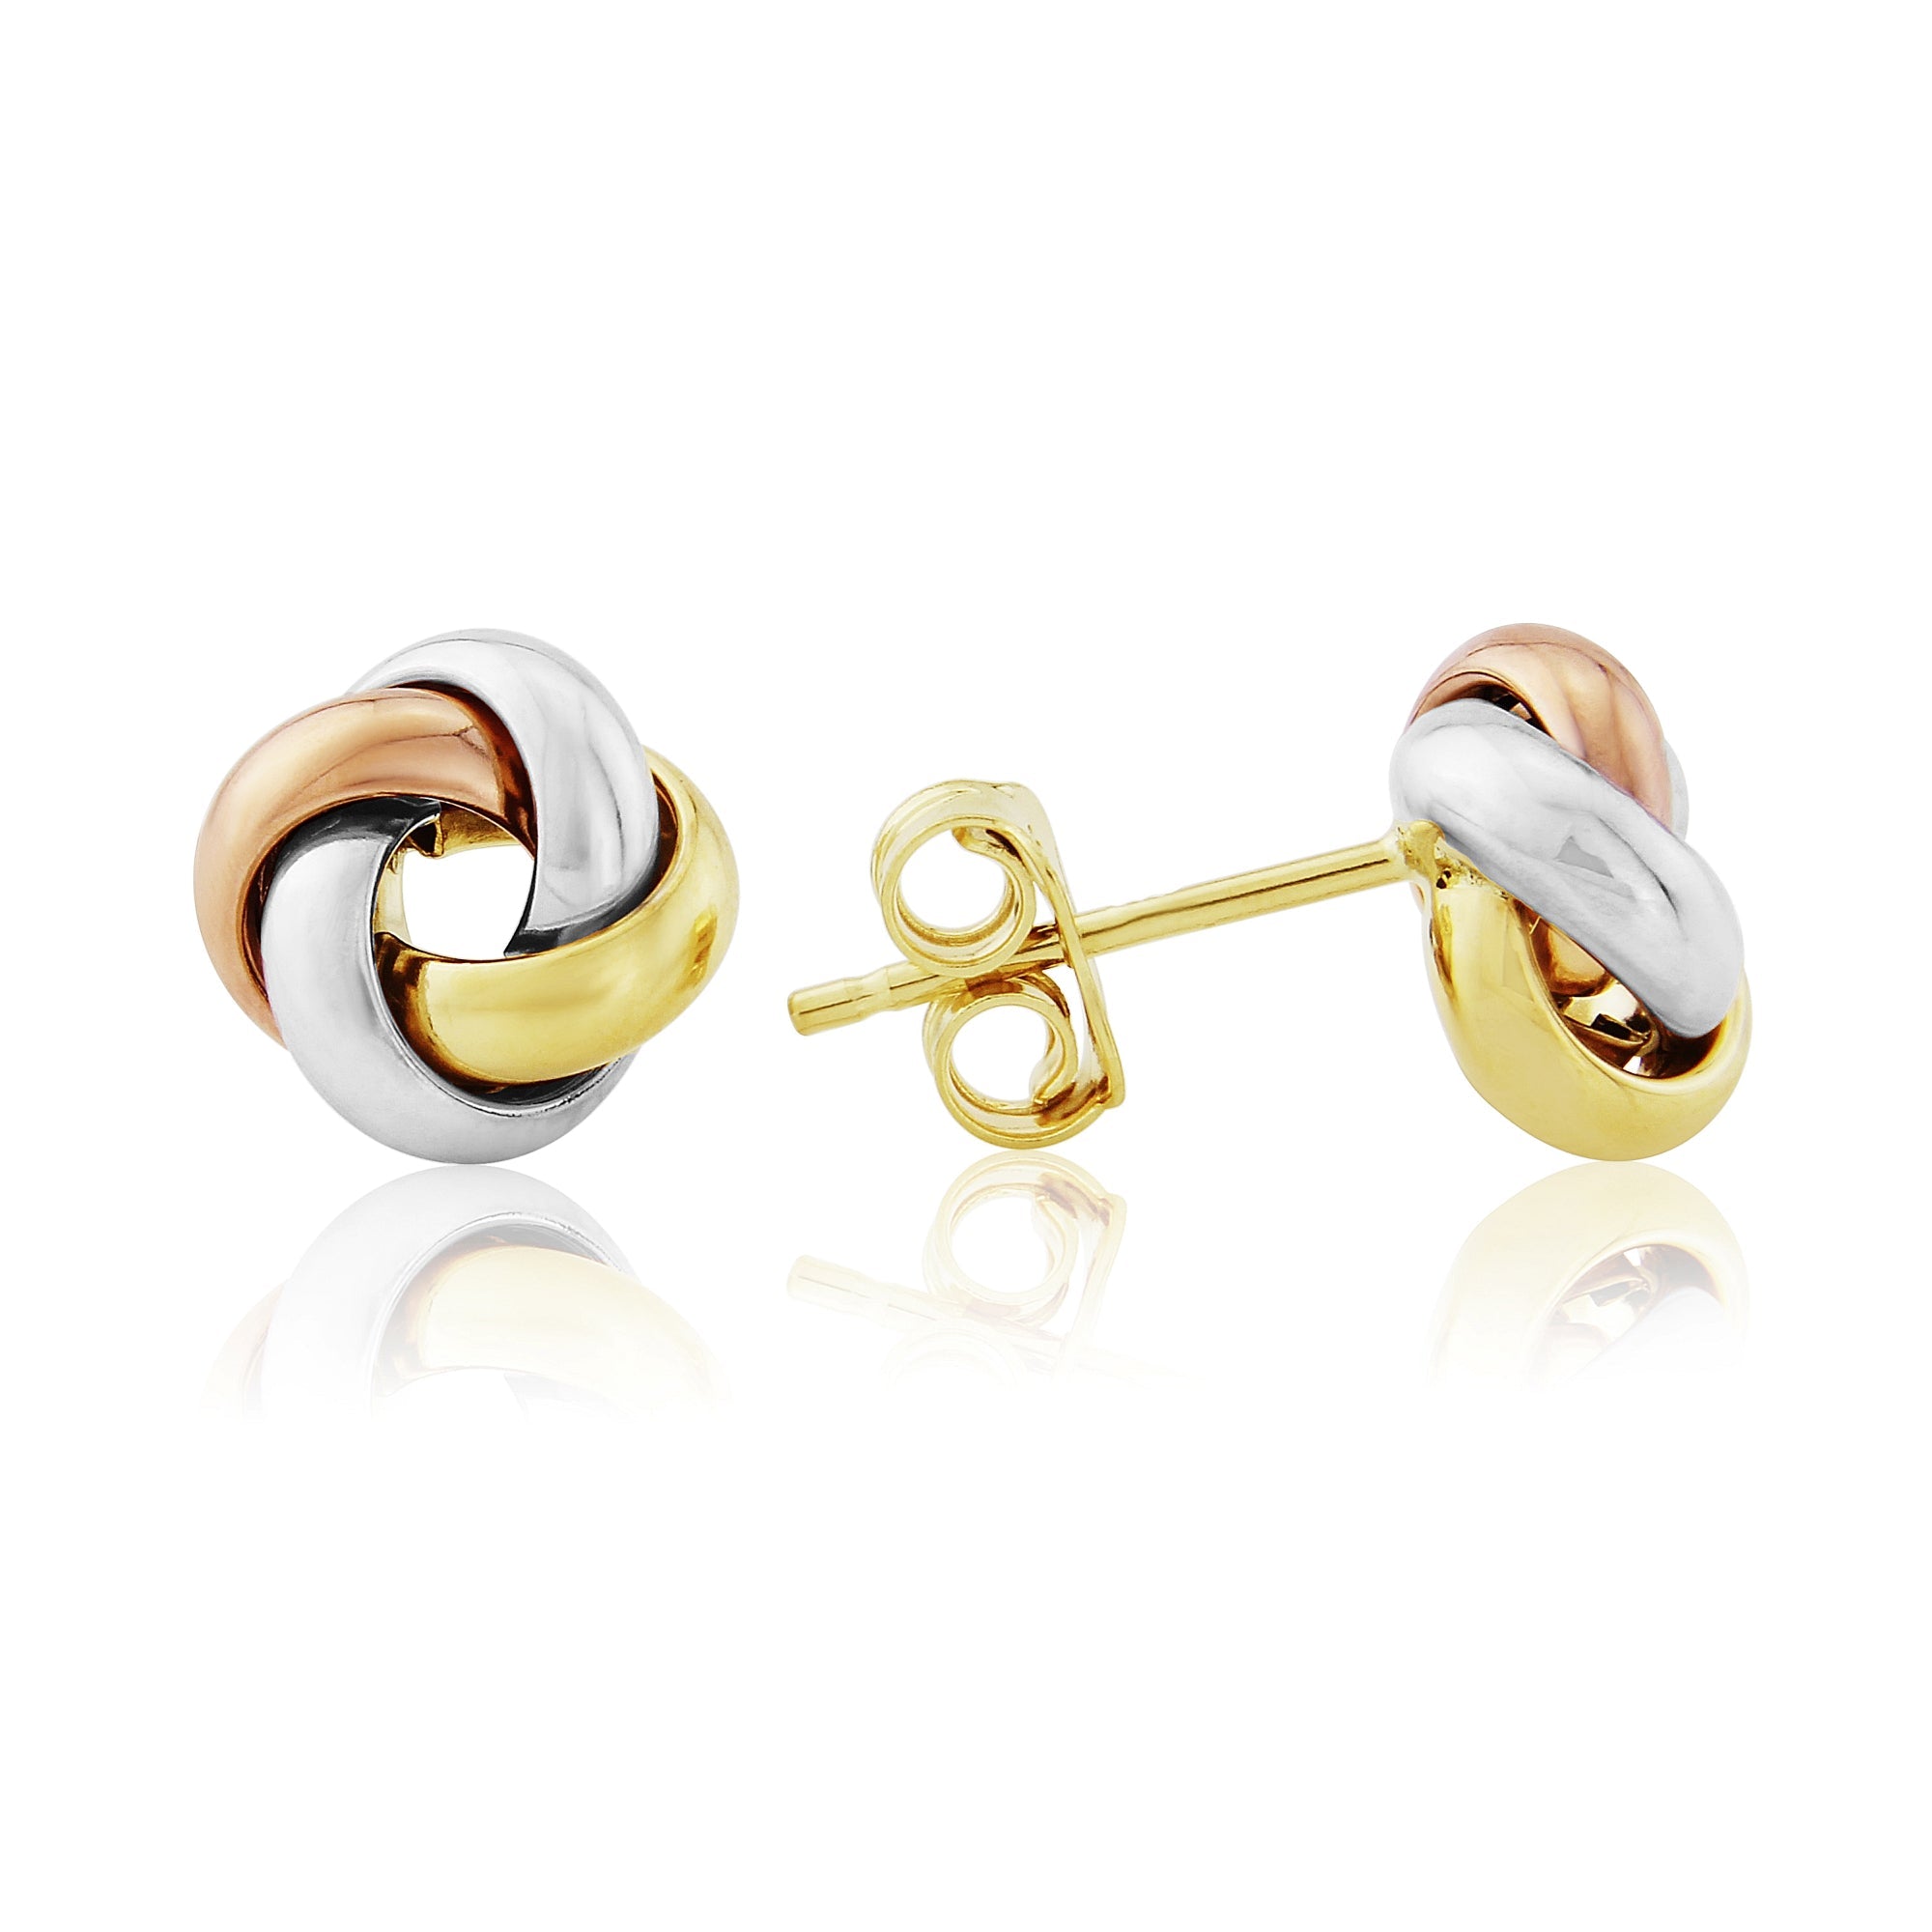 9ct gold 3 colour knot stud earrings